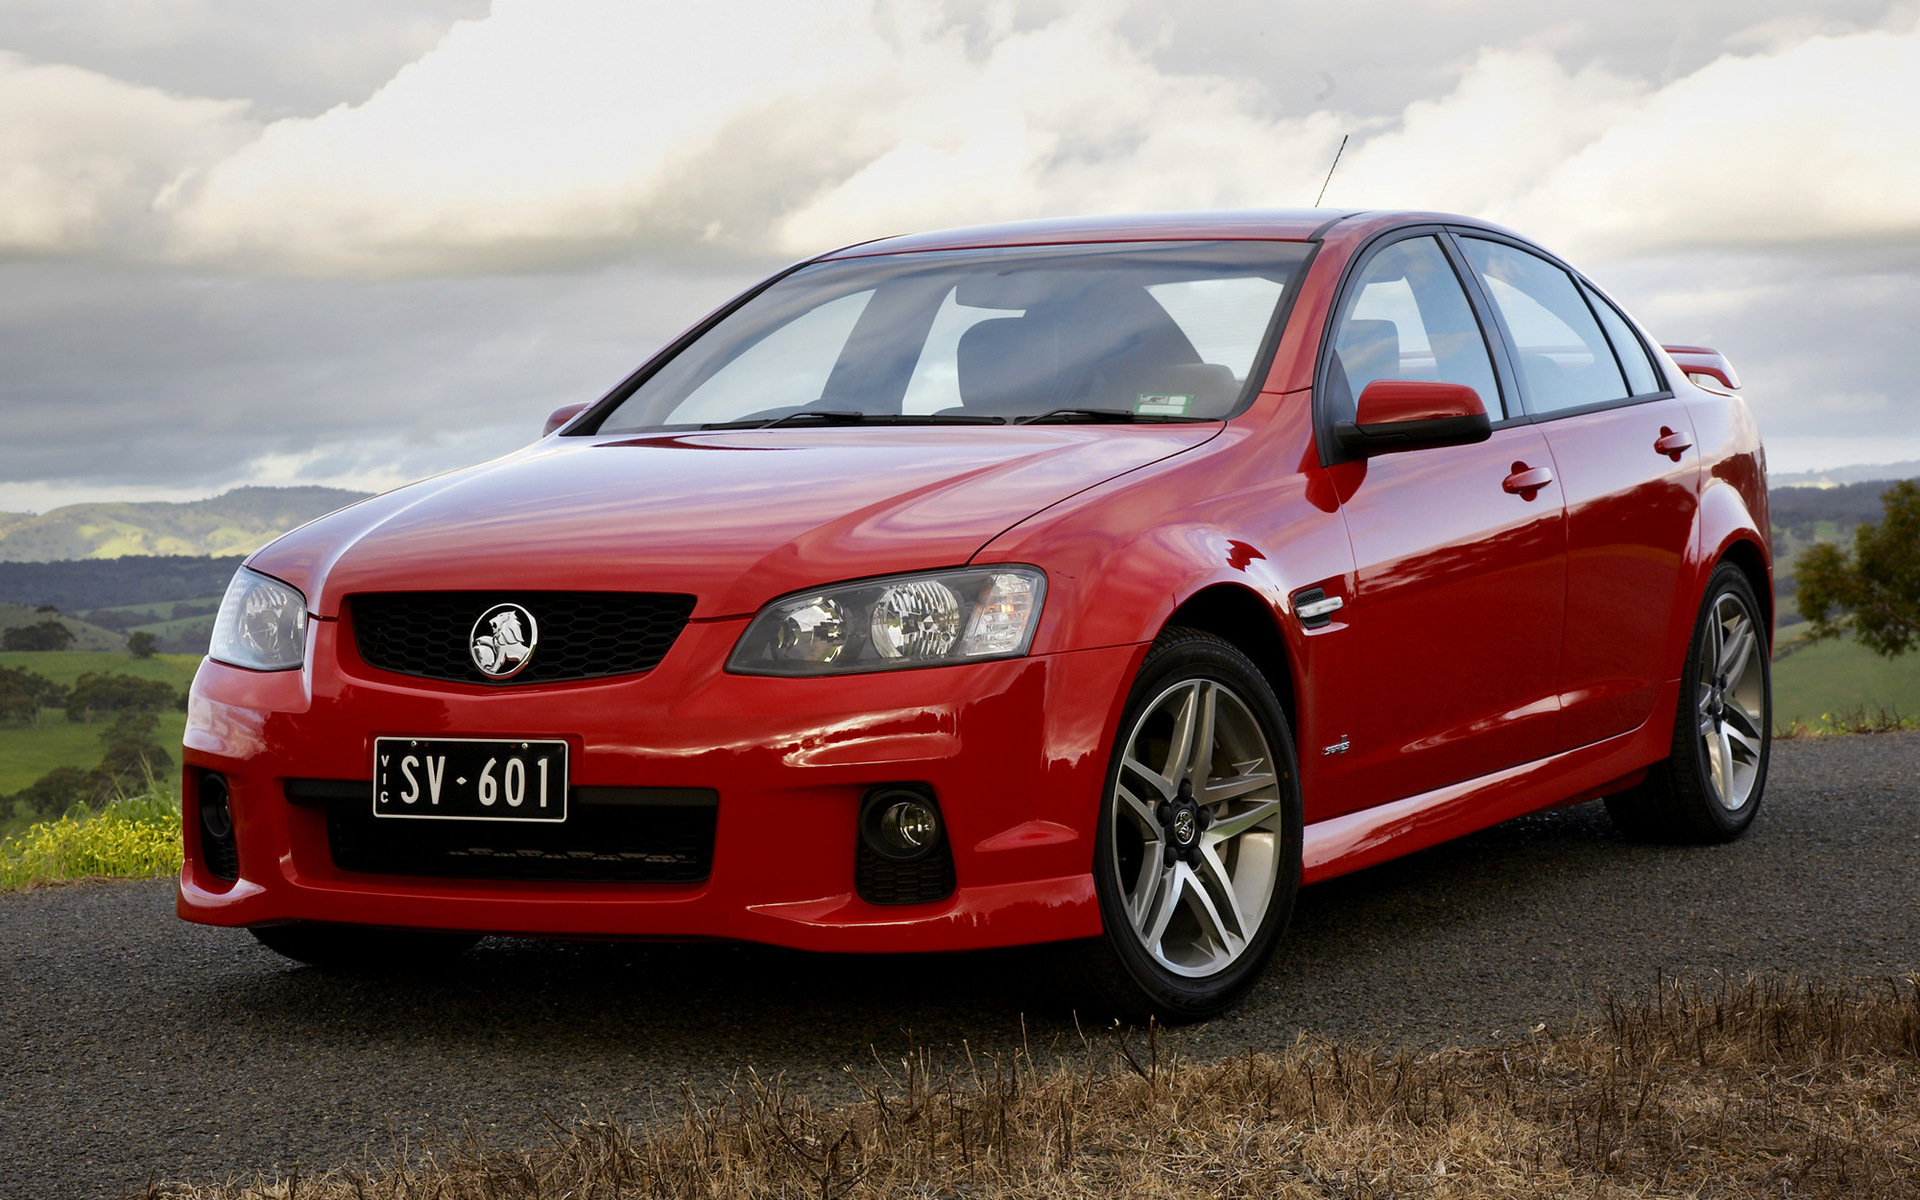 Holden Commodore Wallpapers